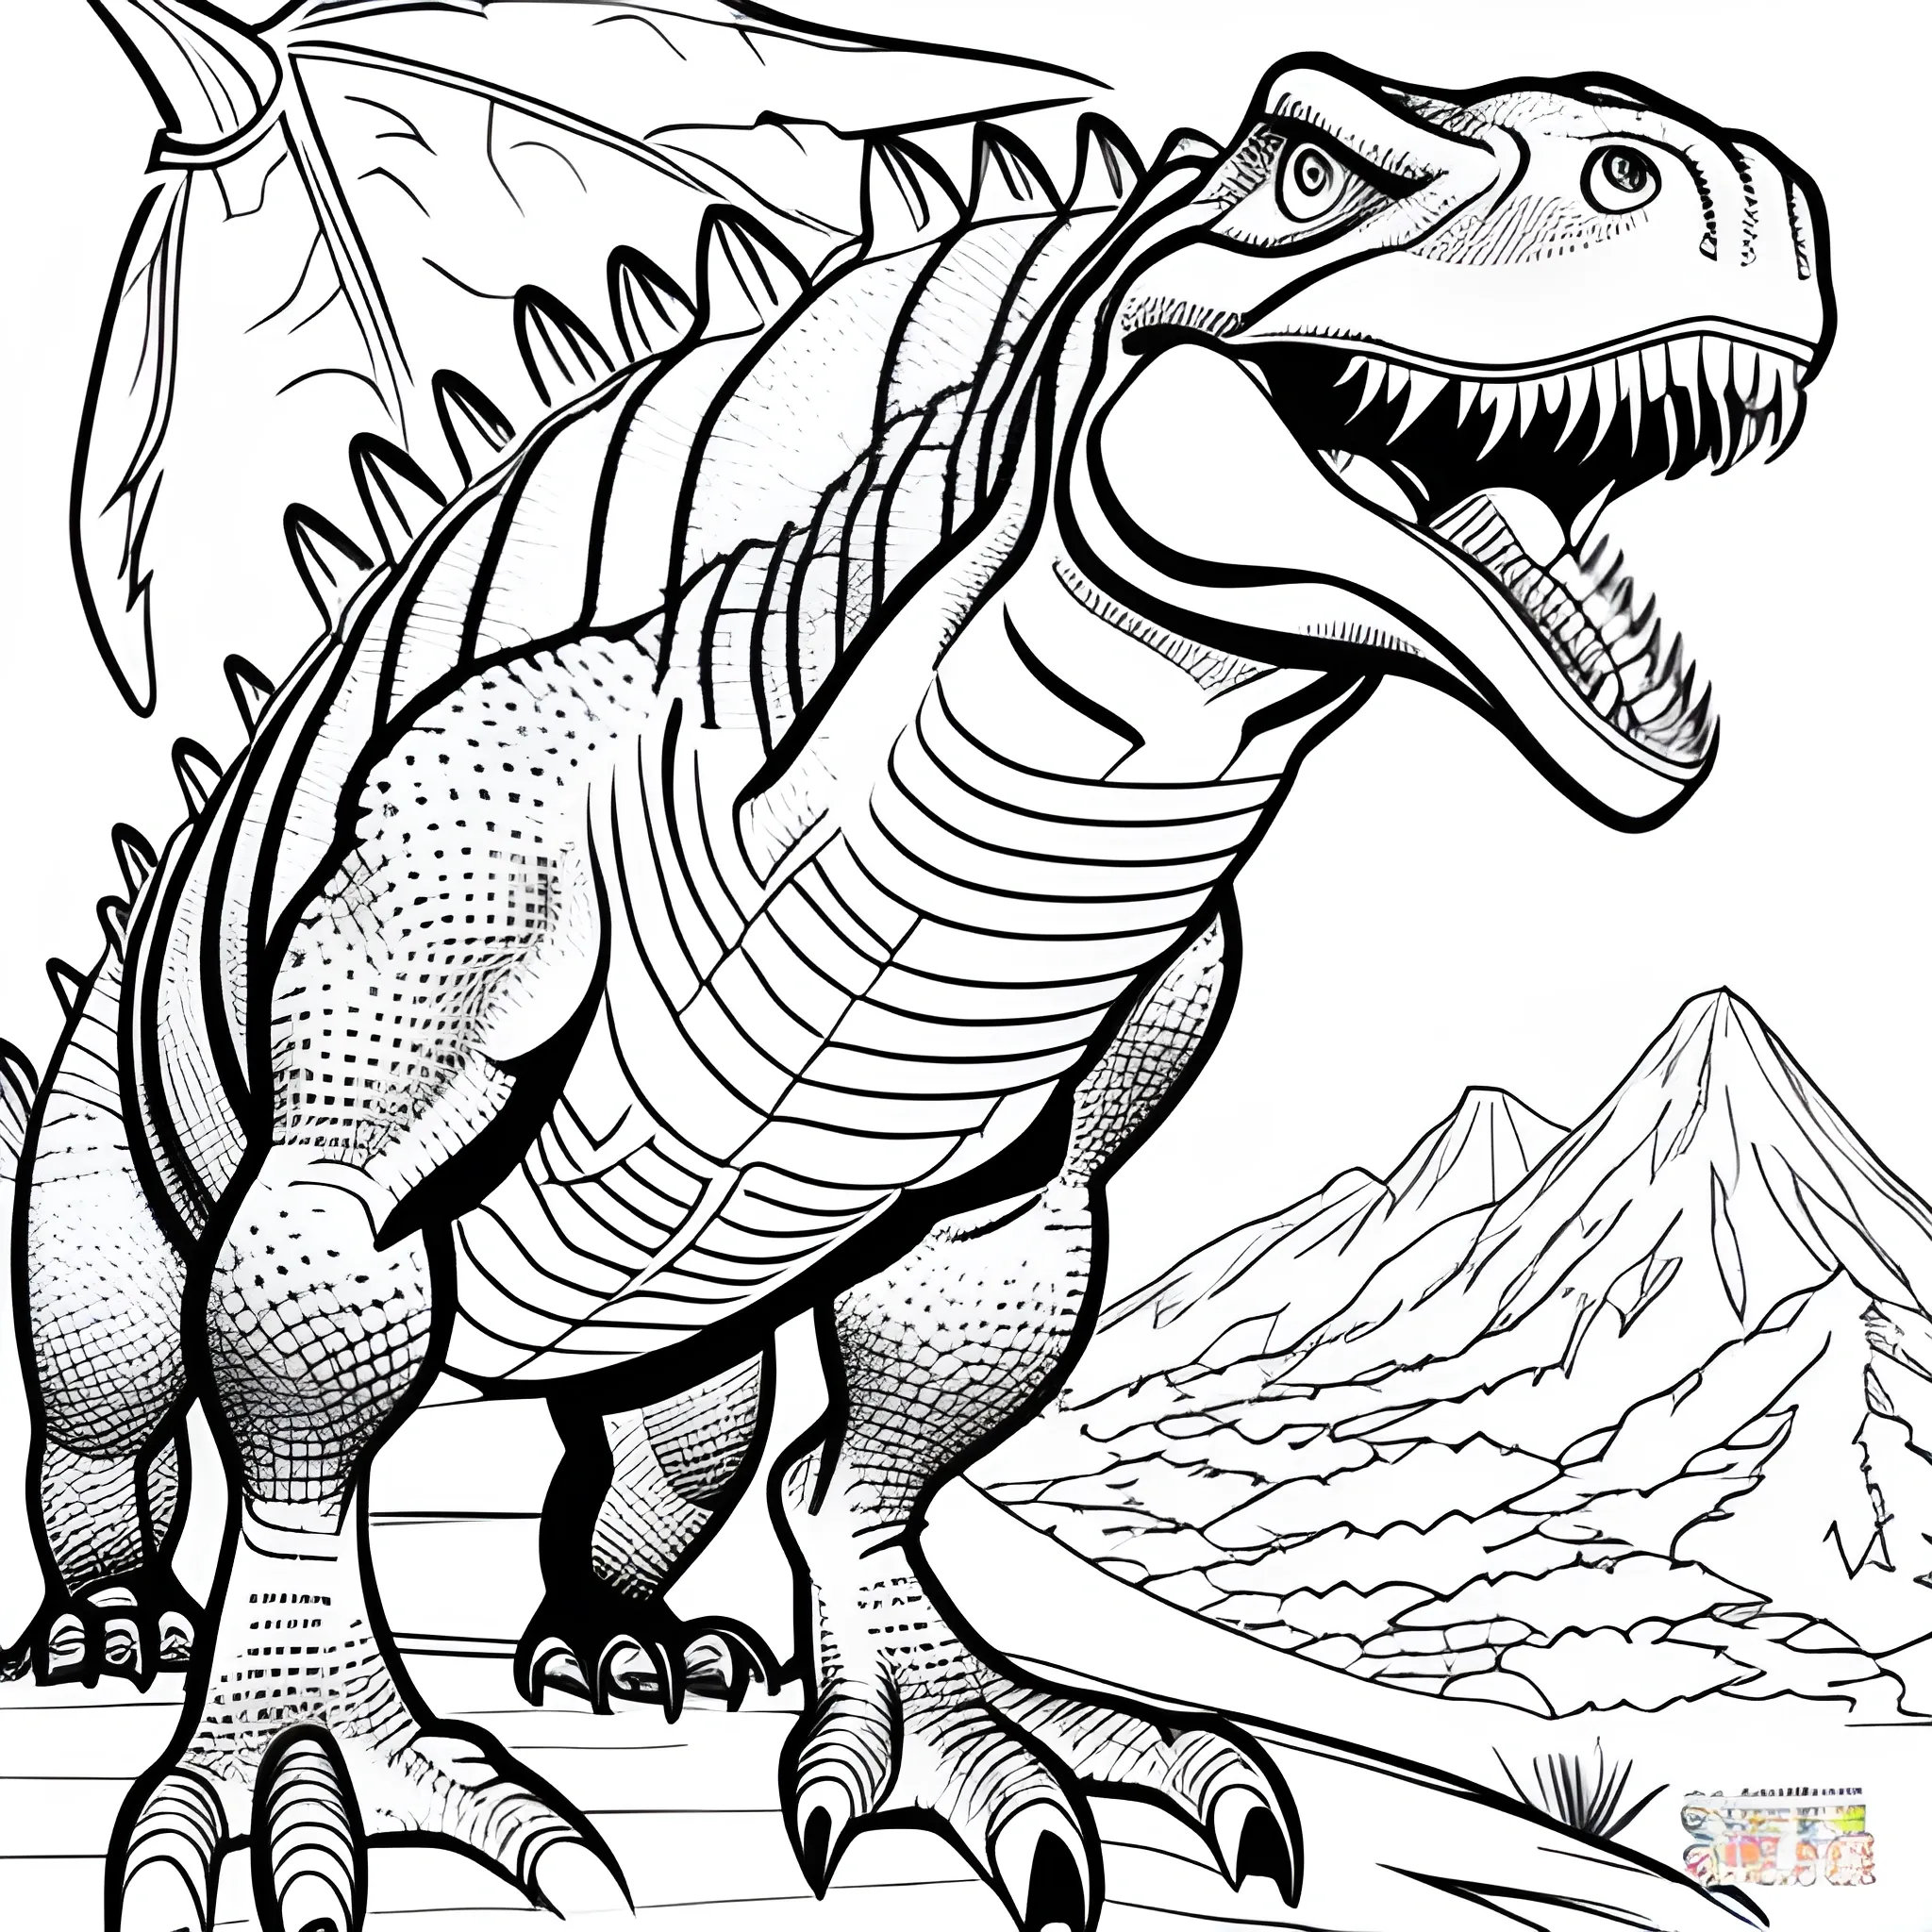 coloring page for kids, dinosaur, from the front, cartoon style, thick lines, low detail, no shading, Sketch
monochrome, no distortion, Cartoon